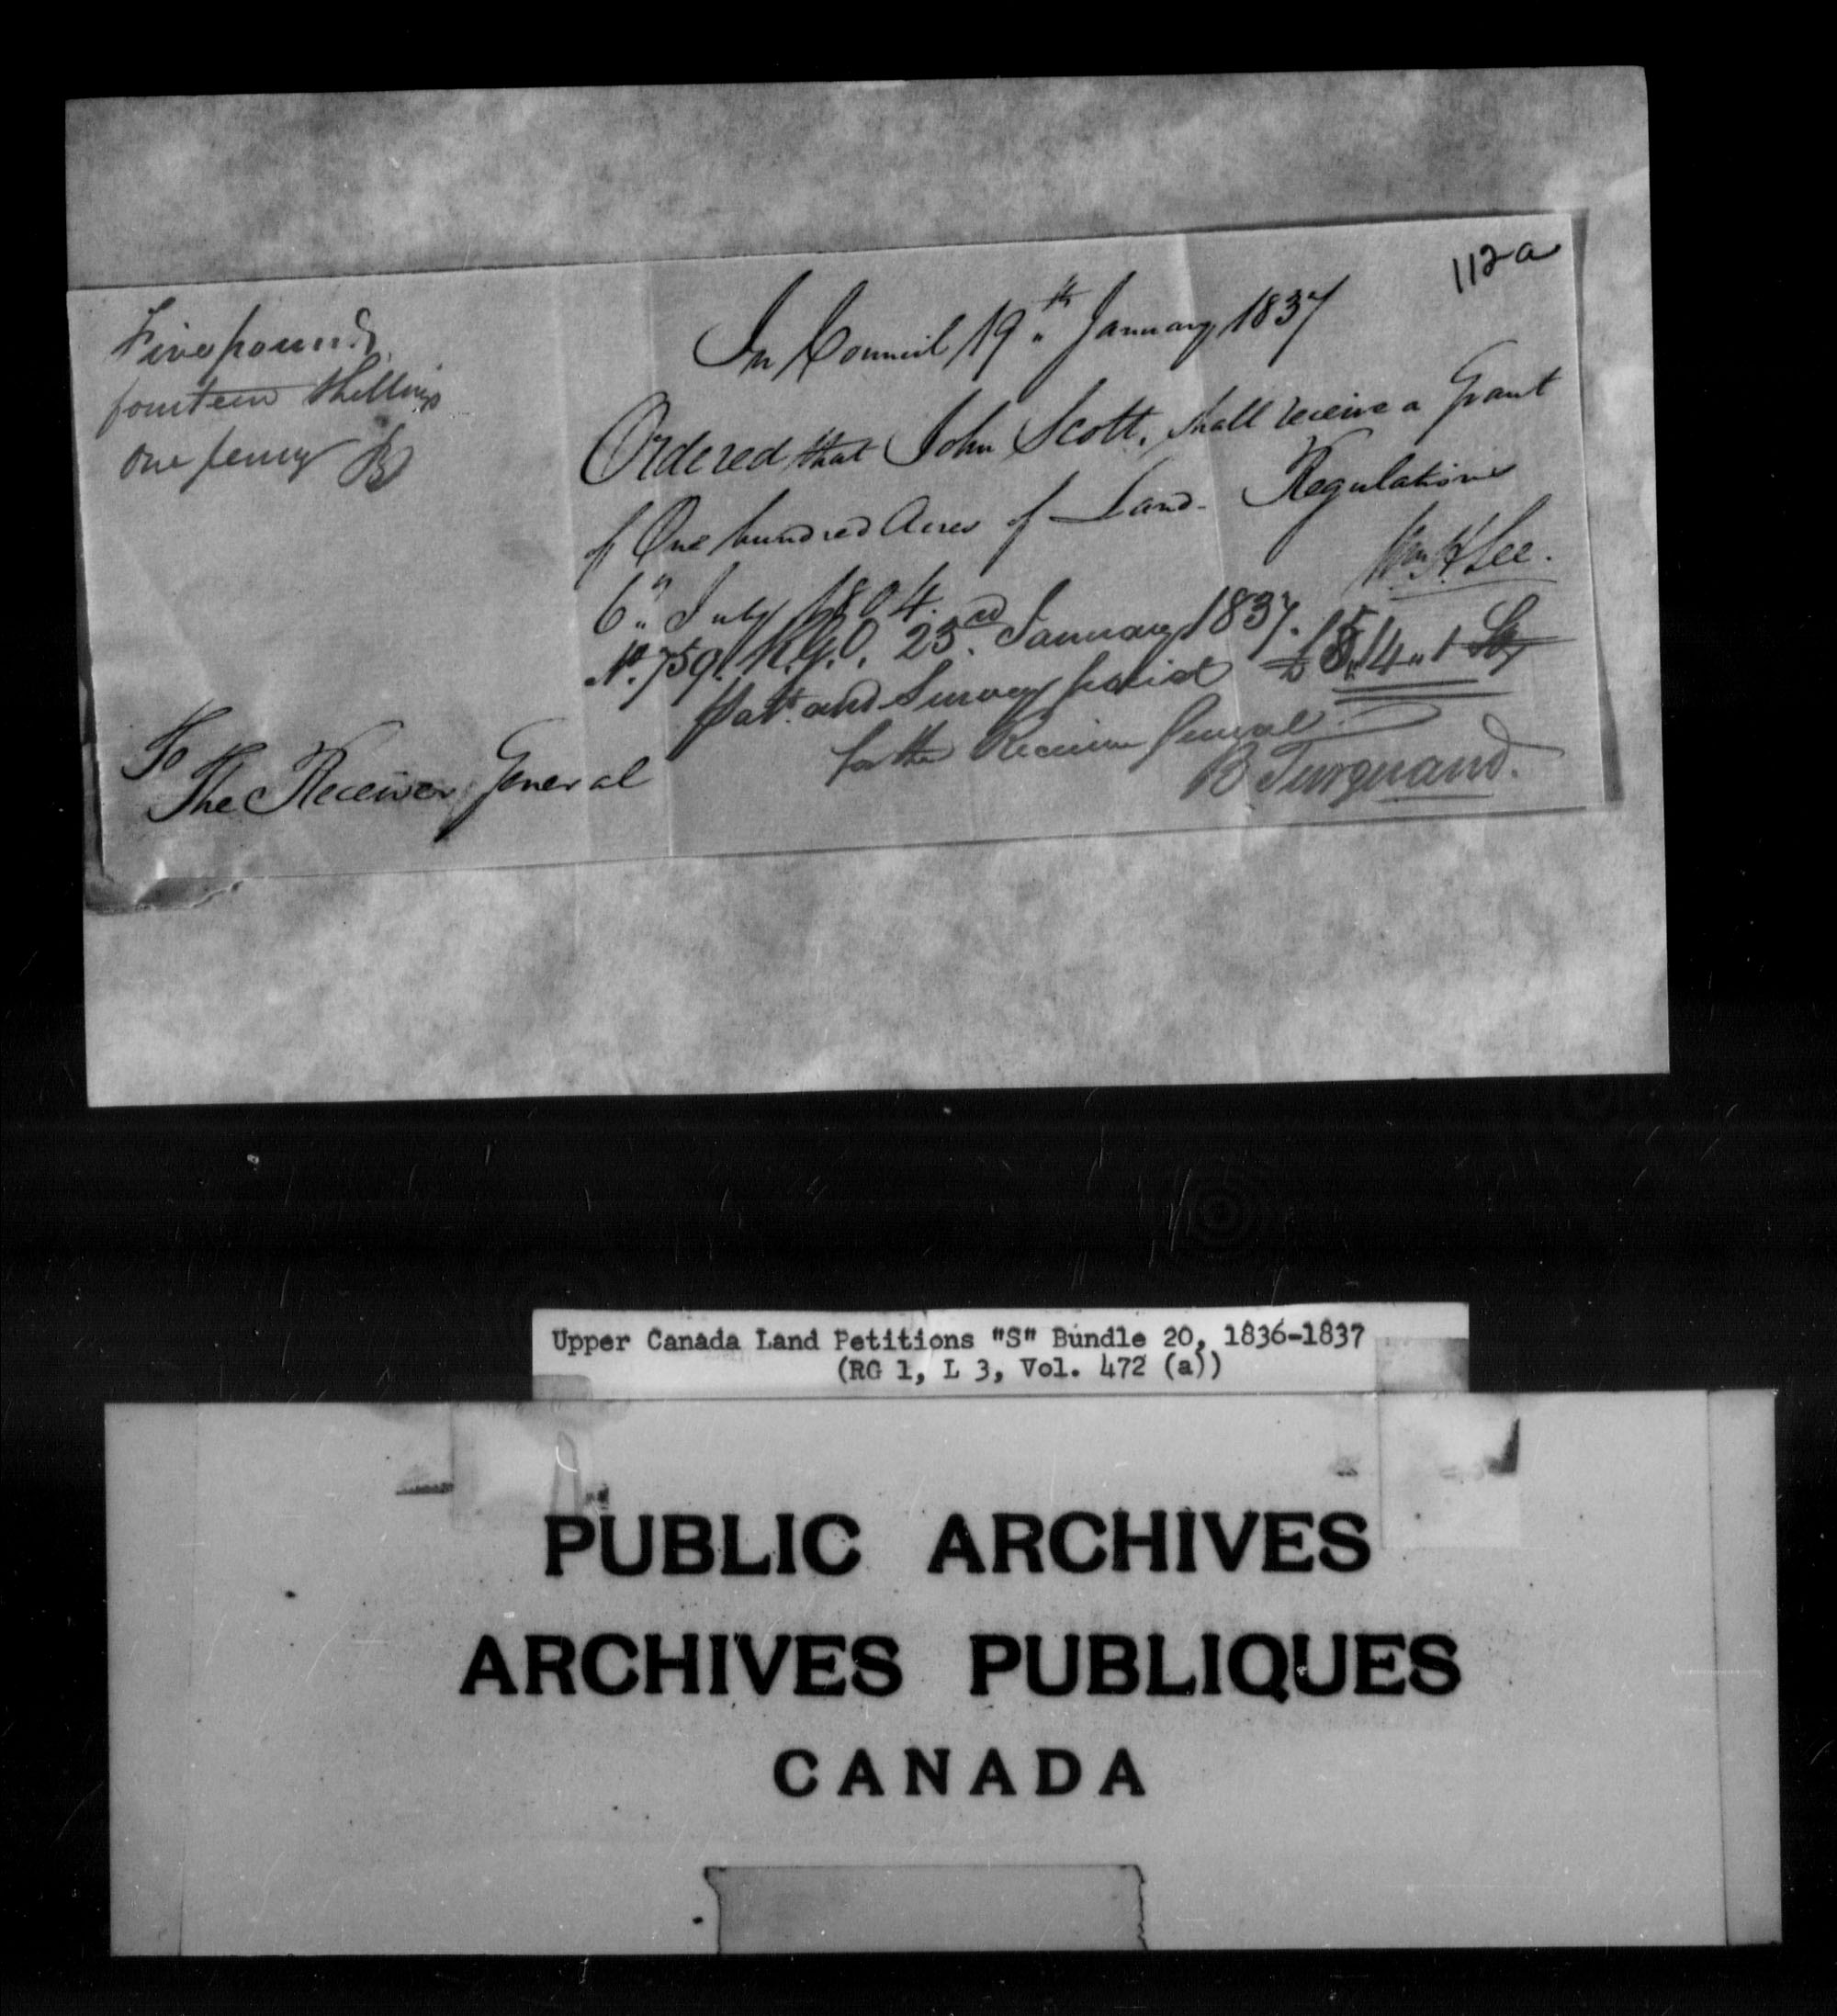 Title: Upper Canada Land Petitions (1763-1865) - Mikan Number: 205131 - Microform: c-2820